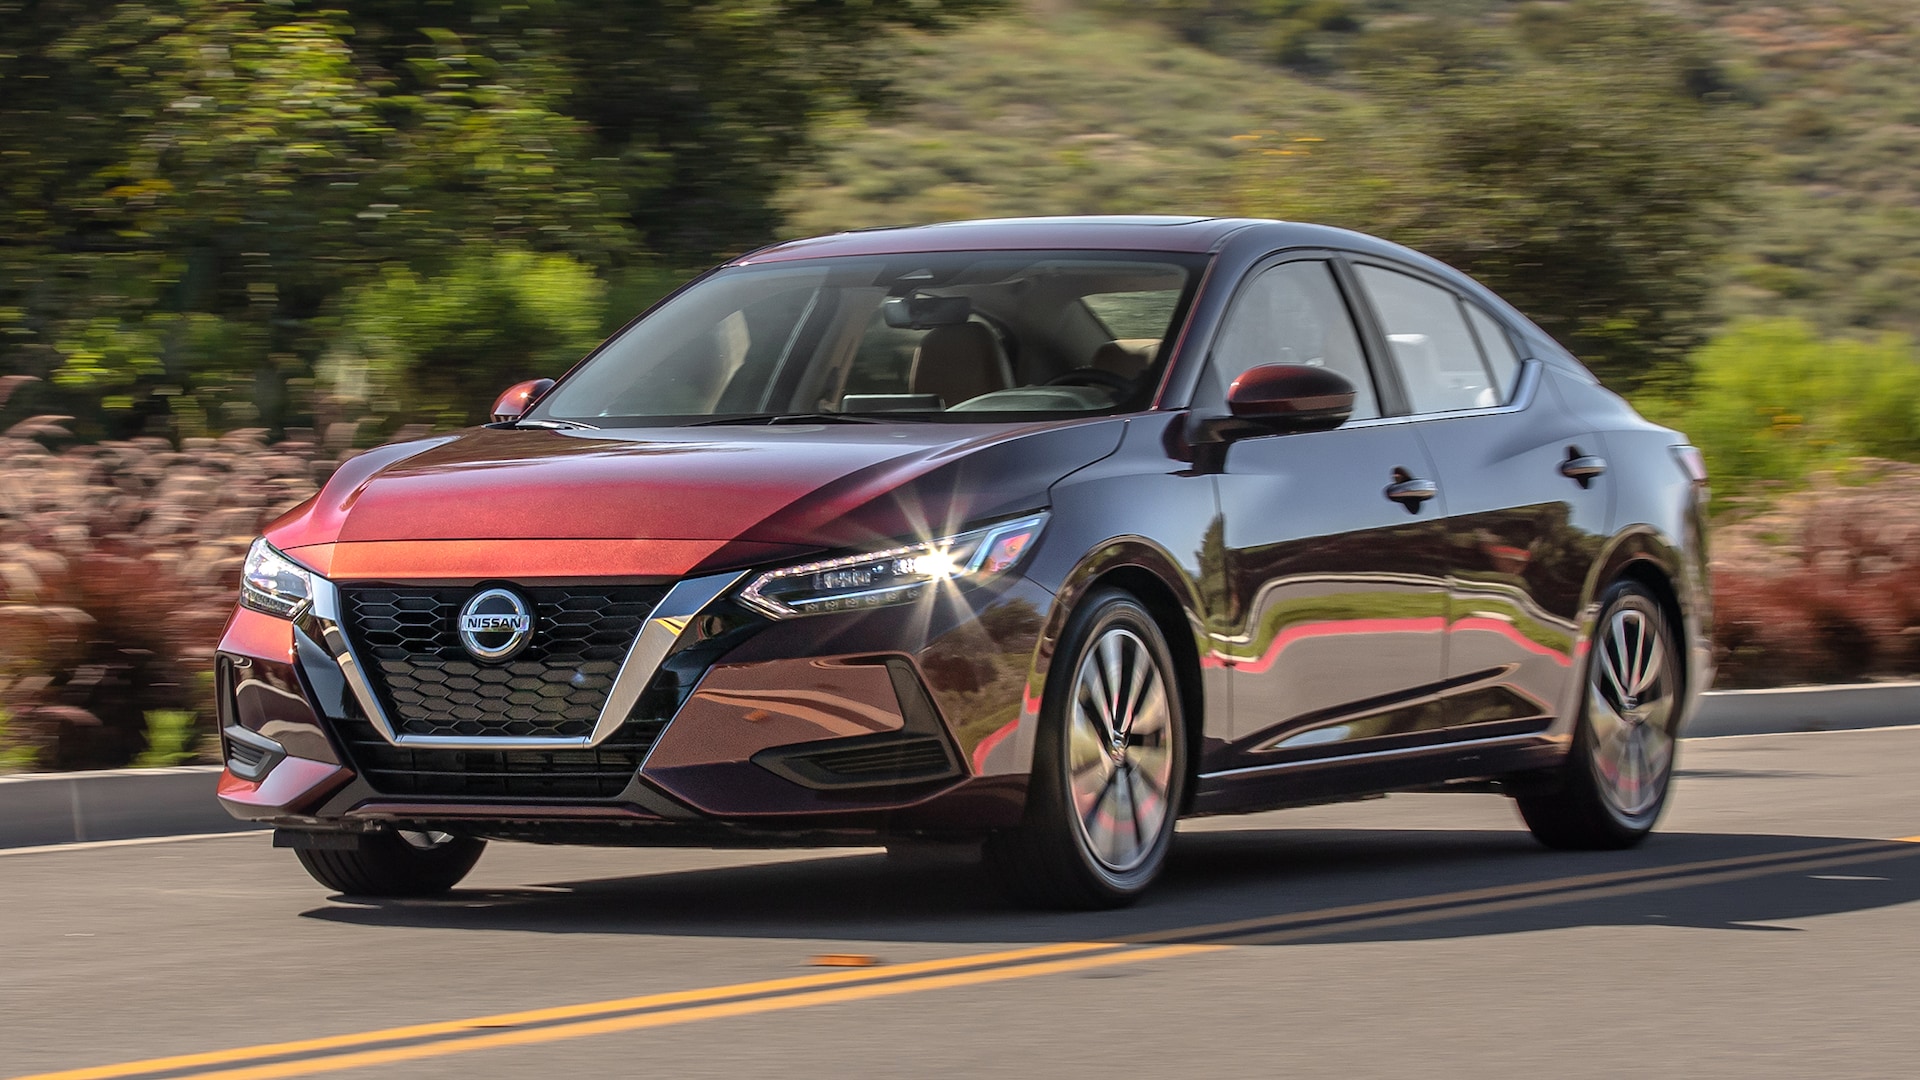 2020 Nissan Sentra: Part of the COVID Landscape